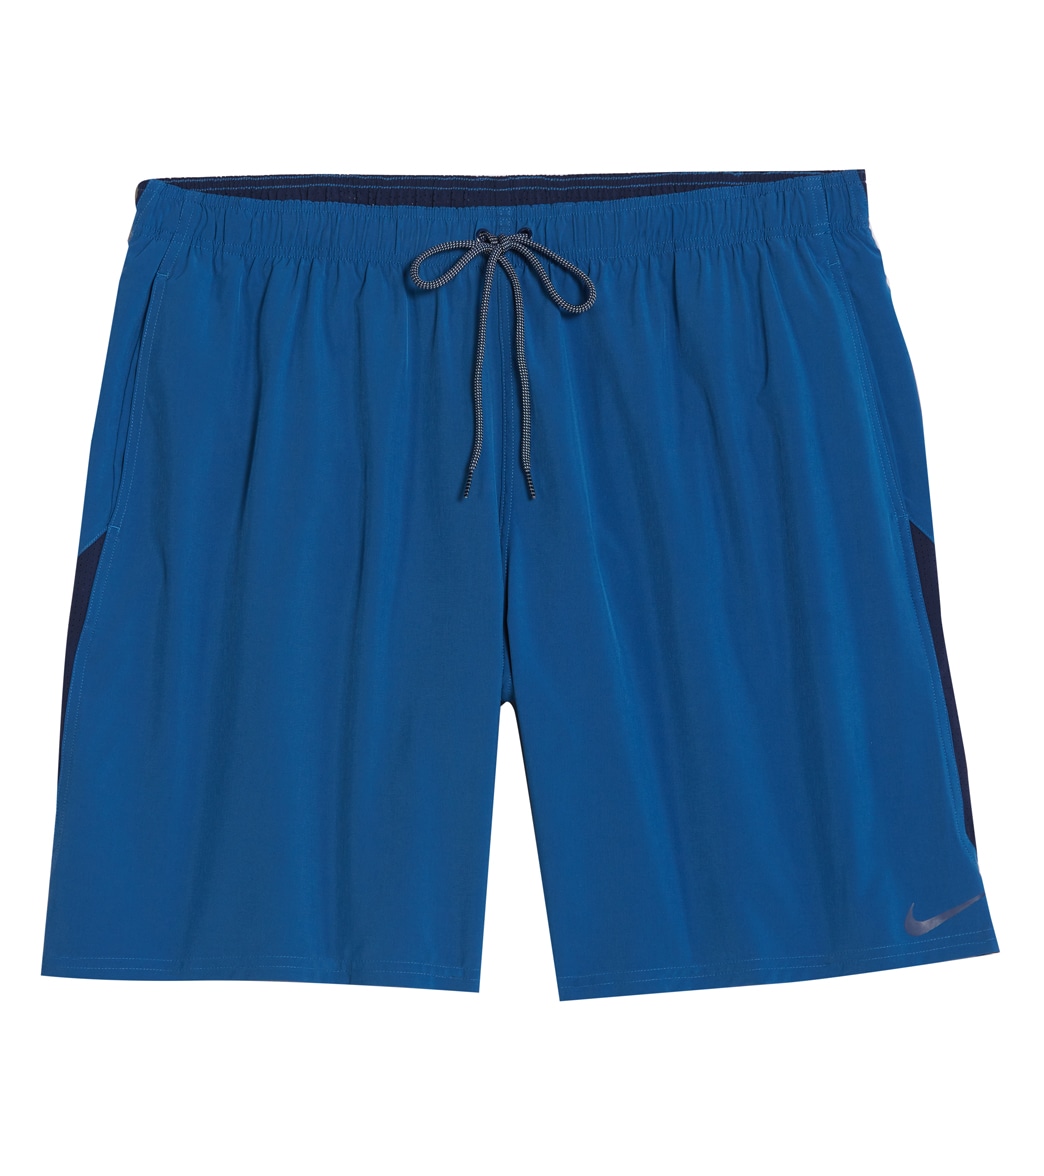 Nike Men's 20 Contend Volley Short Extended Size - Dark Marina Blue 3Xl Polyester - Swimoutlet.com